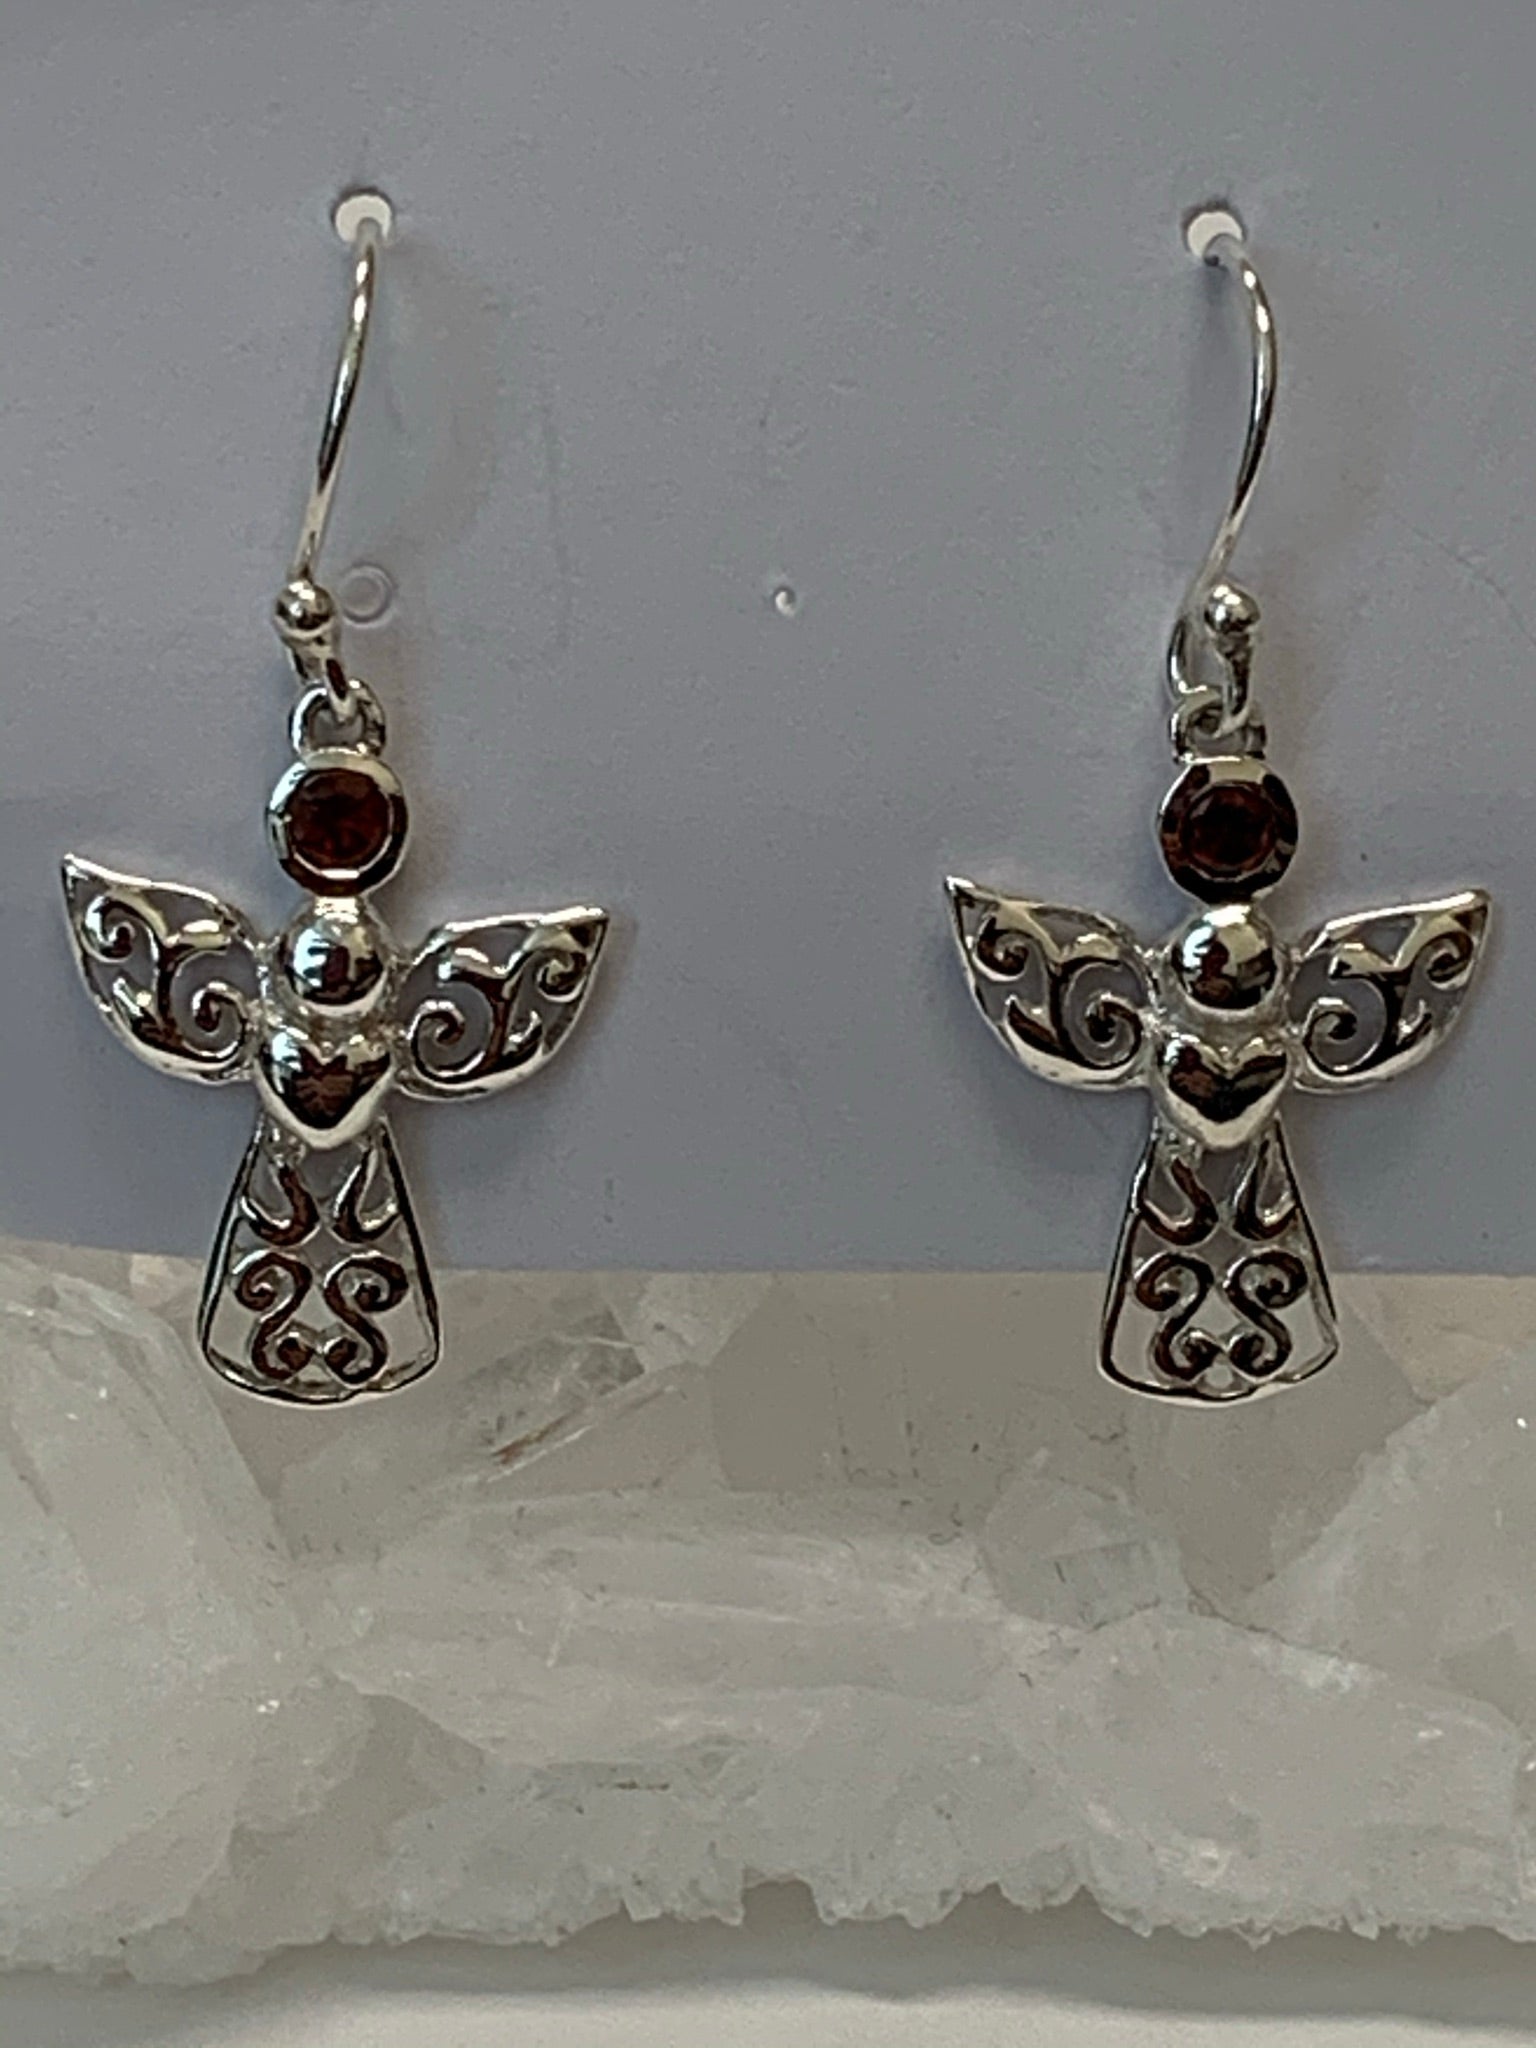 Close-up view. Small, round, faceted garnet gemstones are outlined in sterling silver and set above an angel's wings and dress (the garnet is in place of the angel's head/face). The angel's body and wings are filled with swirls of silver and there is a solid silver heart on the body, beneath the wings. This is a small and delicate pair of earrings. They are lightweight, have wires, not posts and are approximately 1½" long.